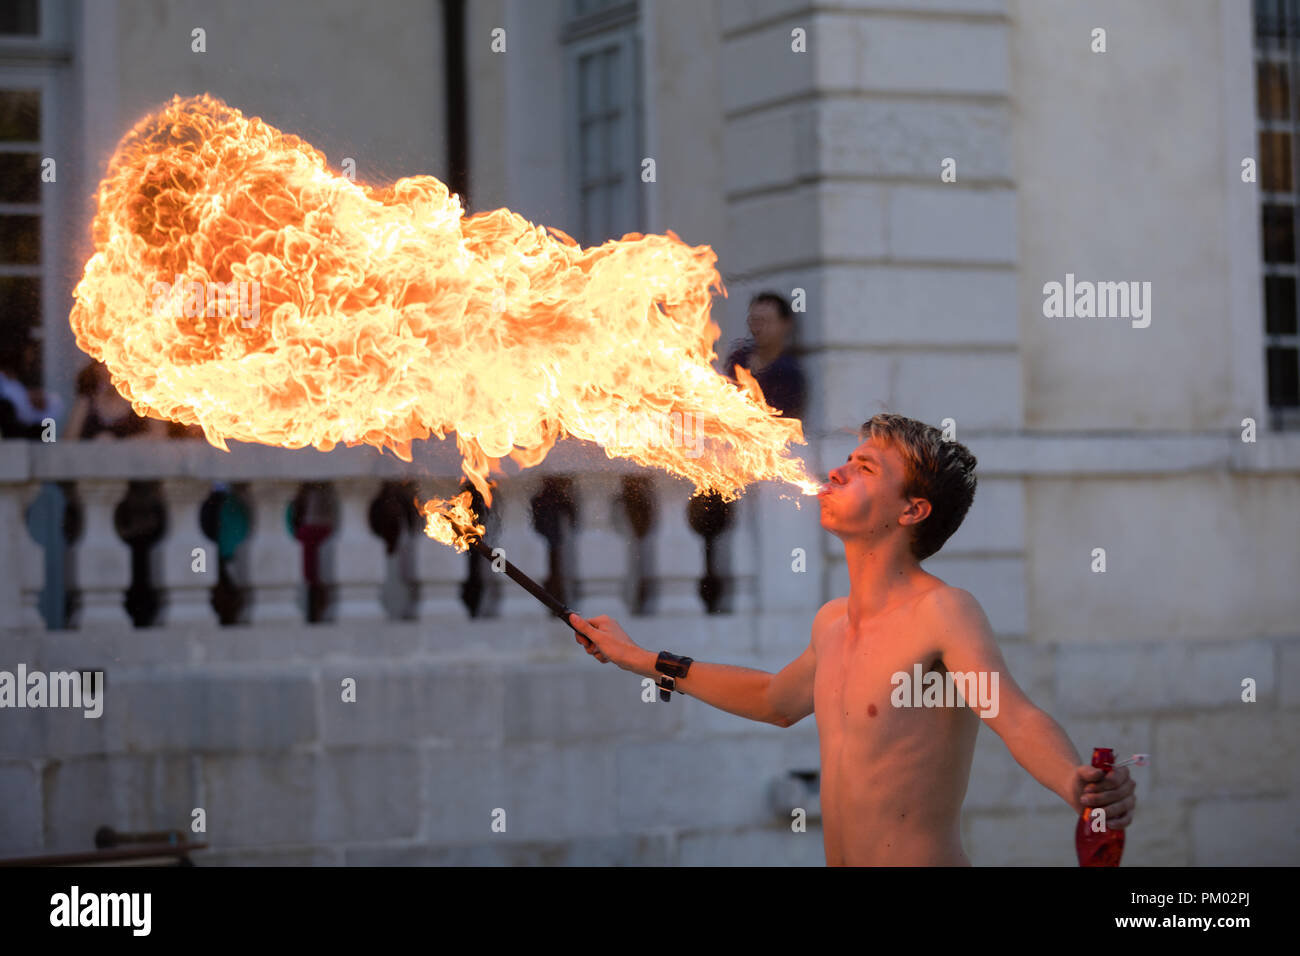 Sassenage castle, Isere, France - September 15 2018 : European Heritage Day, Young fire breather spitting flames. Stock Photo